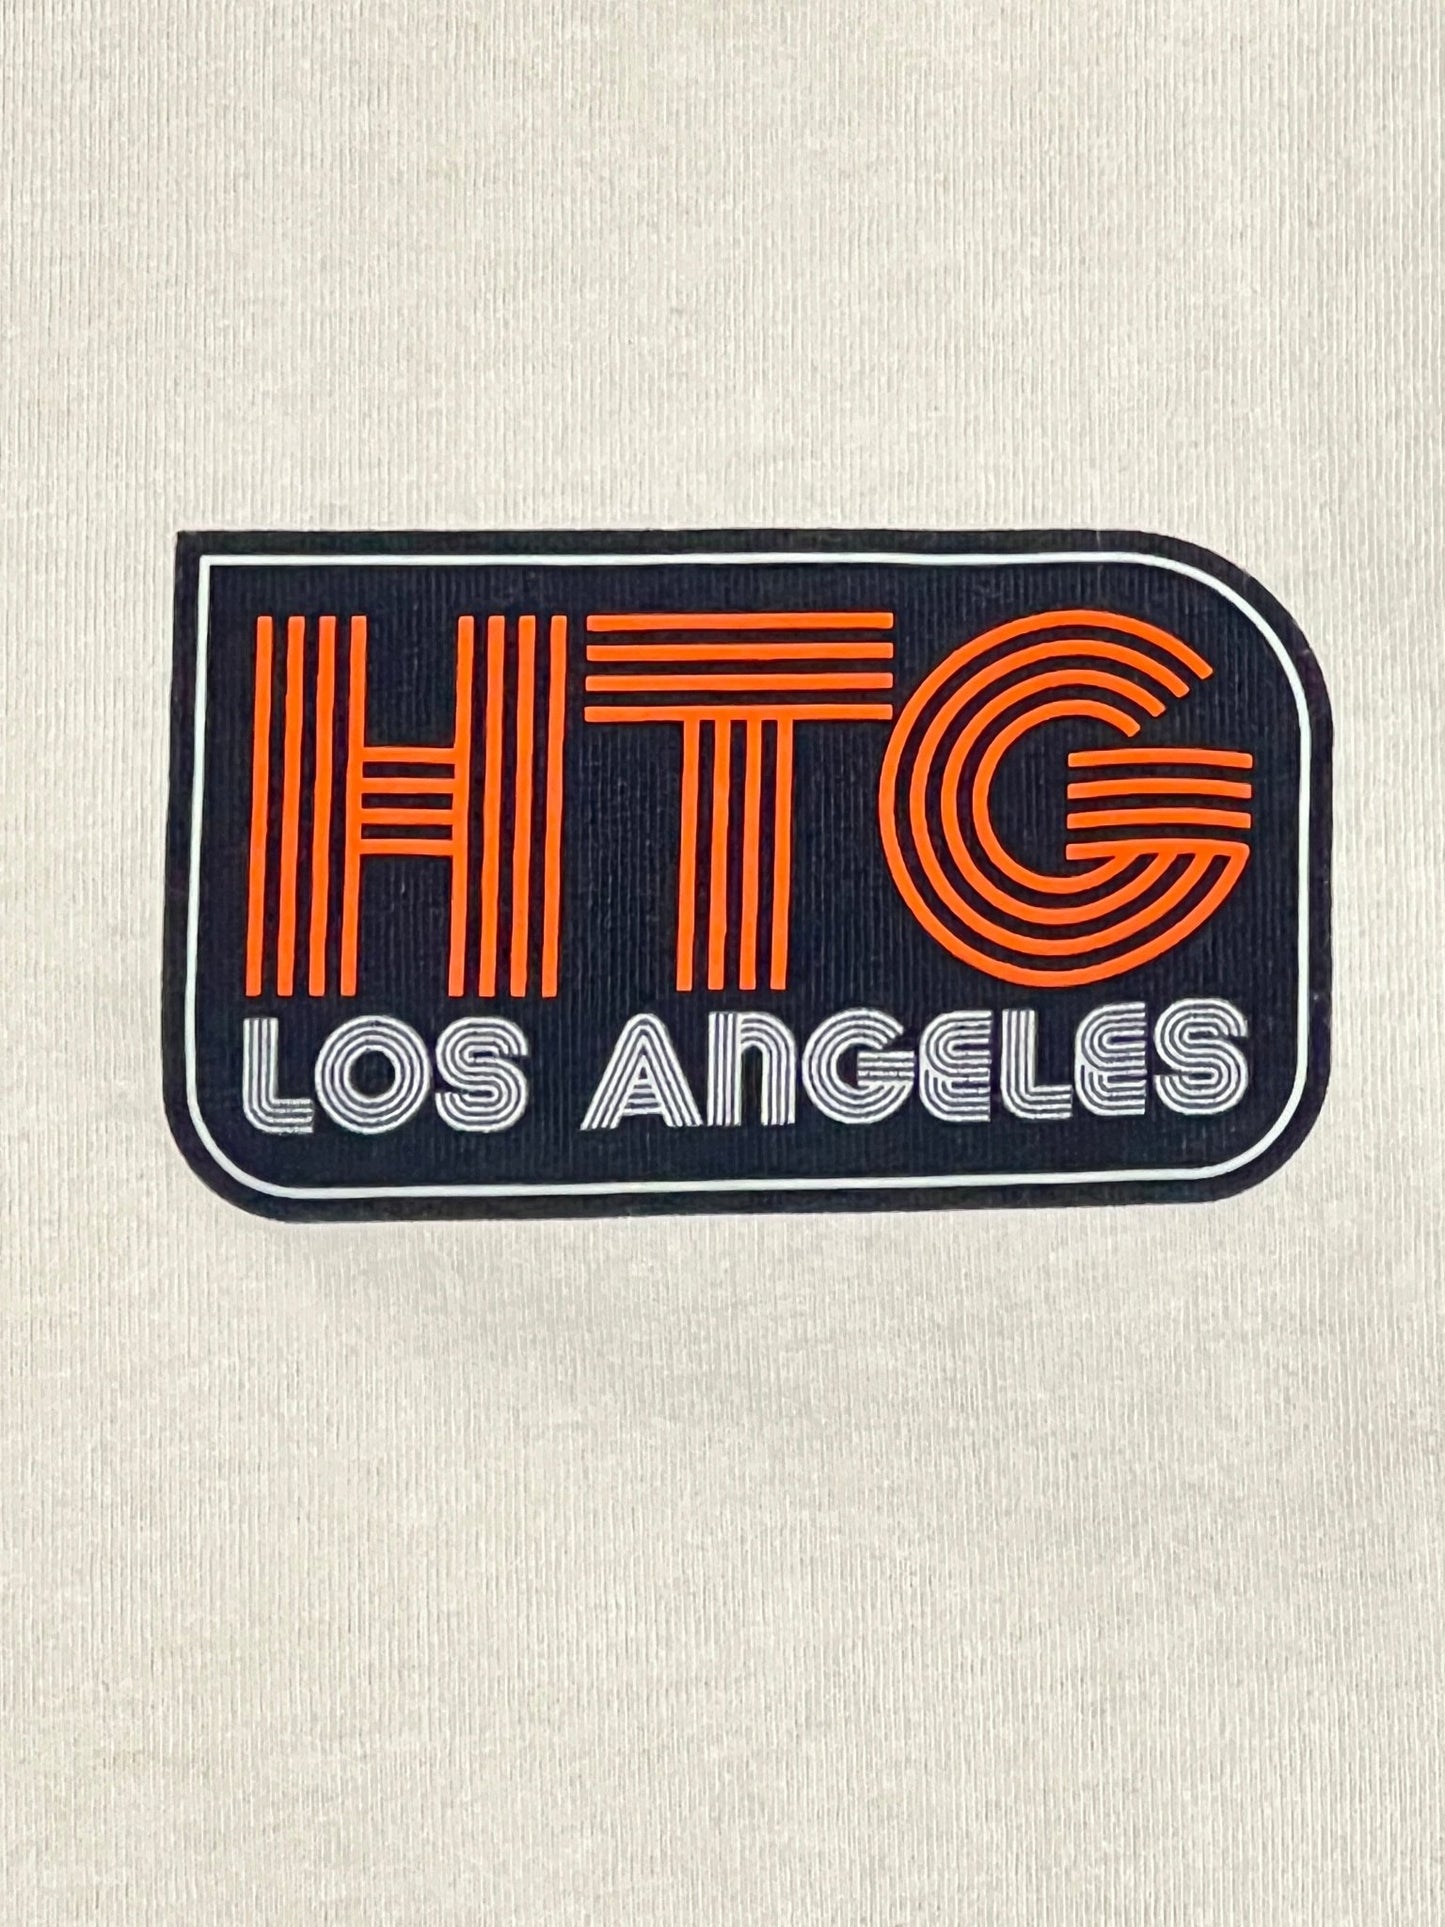 HONOR THE GIFT A-SPRING HTG LOS ANGELES SS TEE BONE